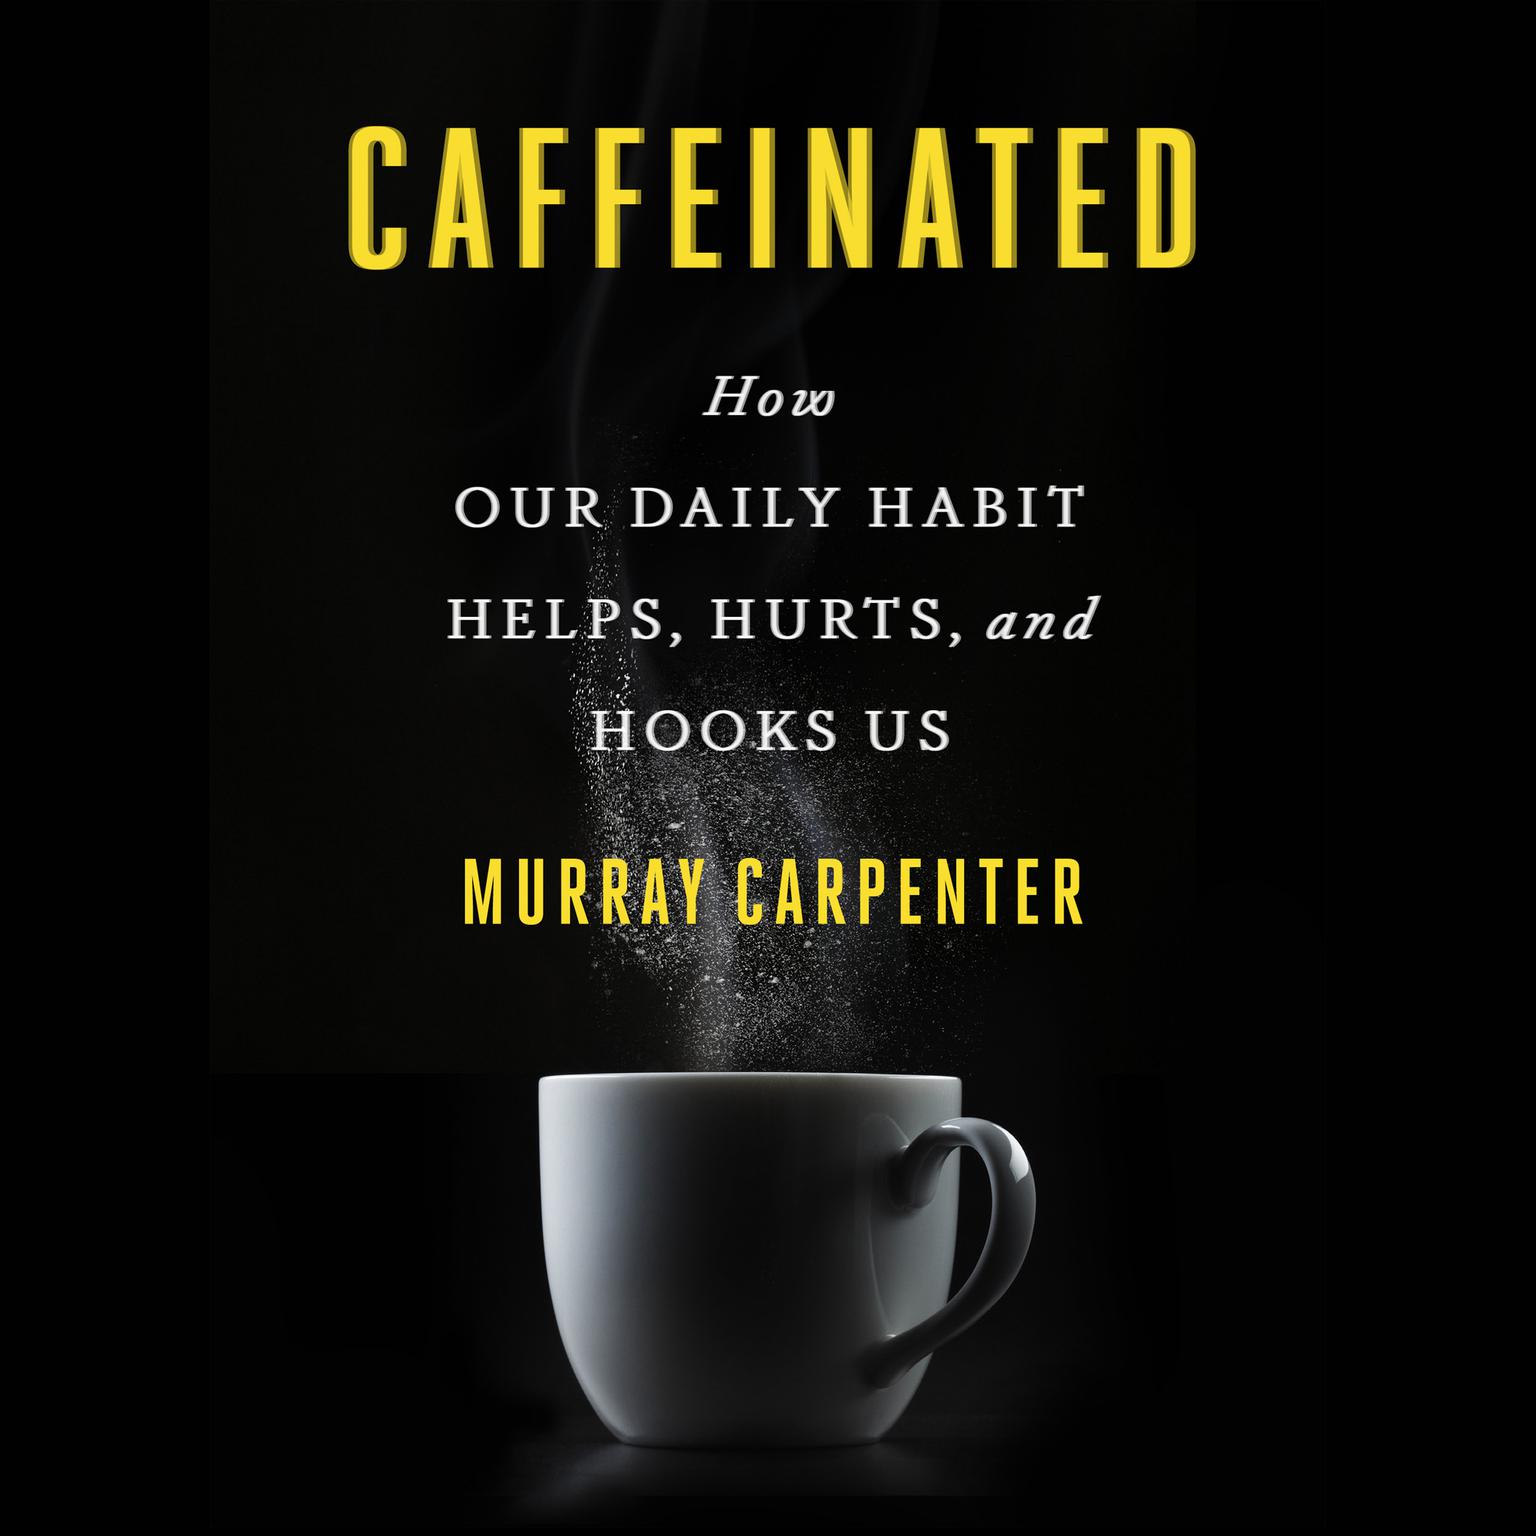 Caffeinated: How Our Daily Habit Helps, Hurts, and Hooks Us Audiobook, by Murray Carpenter